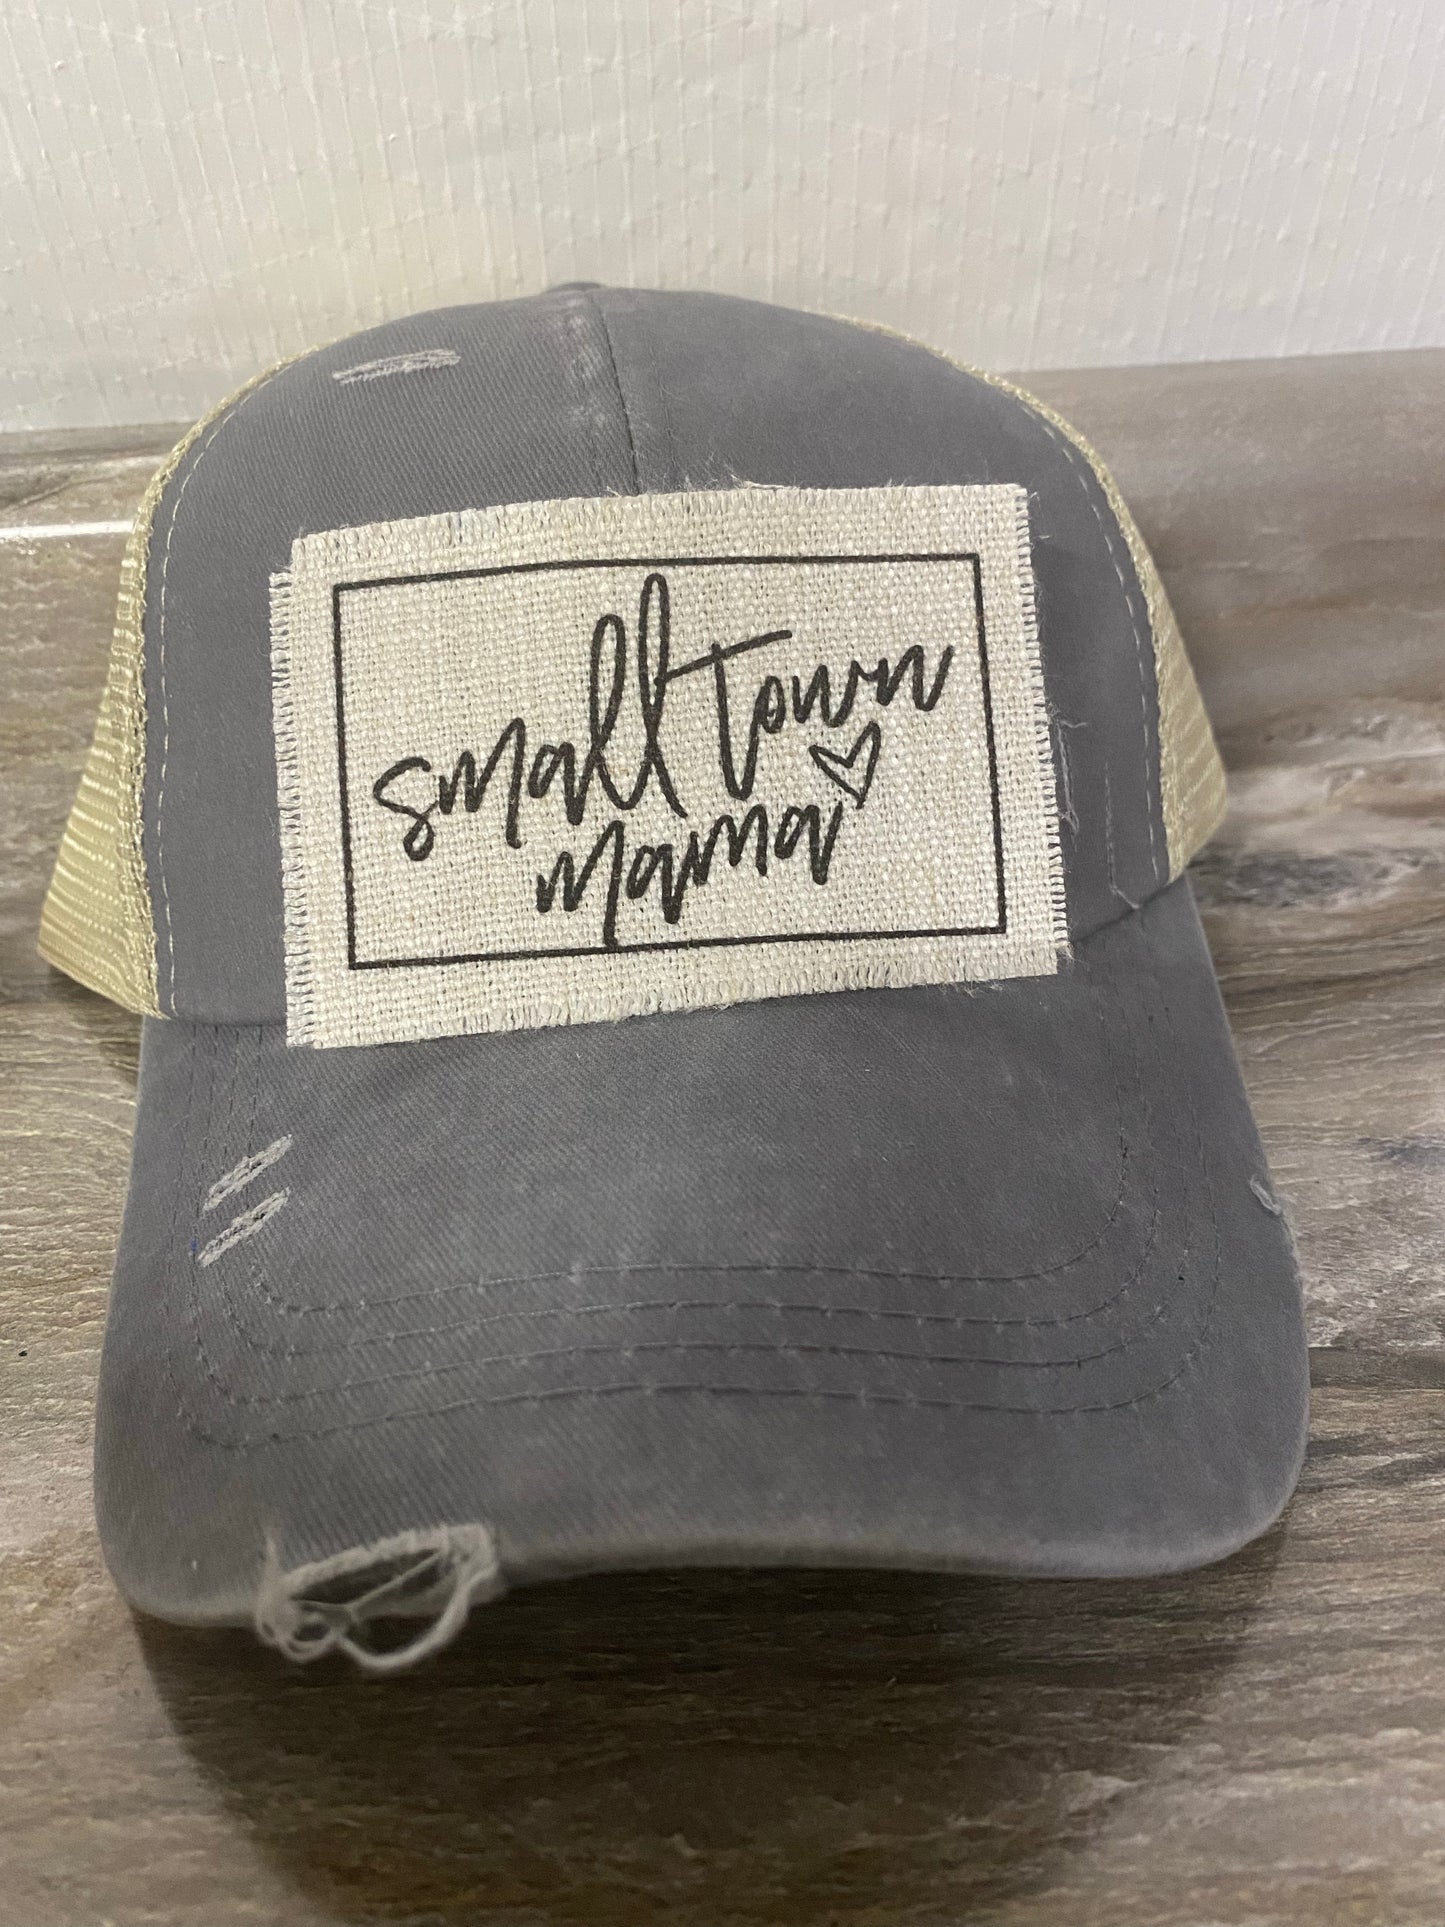 Small Town Mama Hat Patch